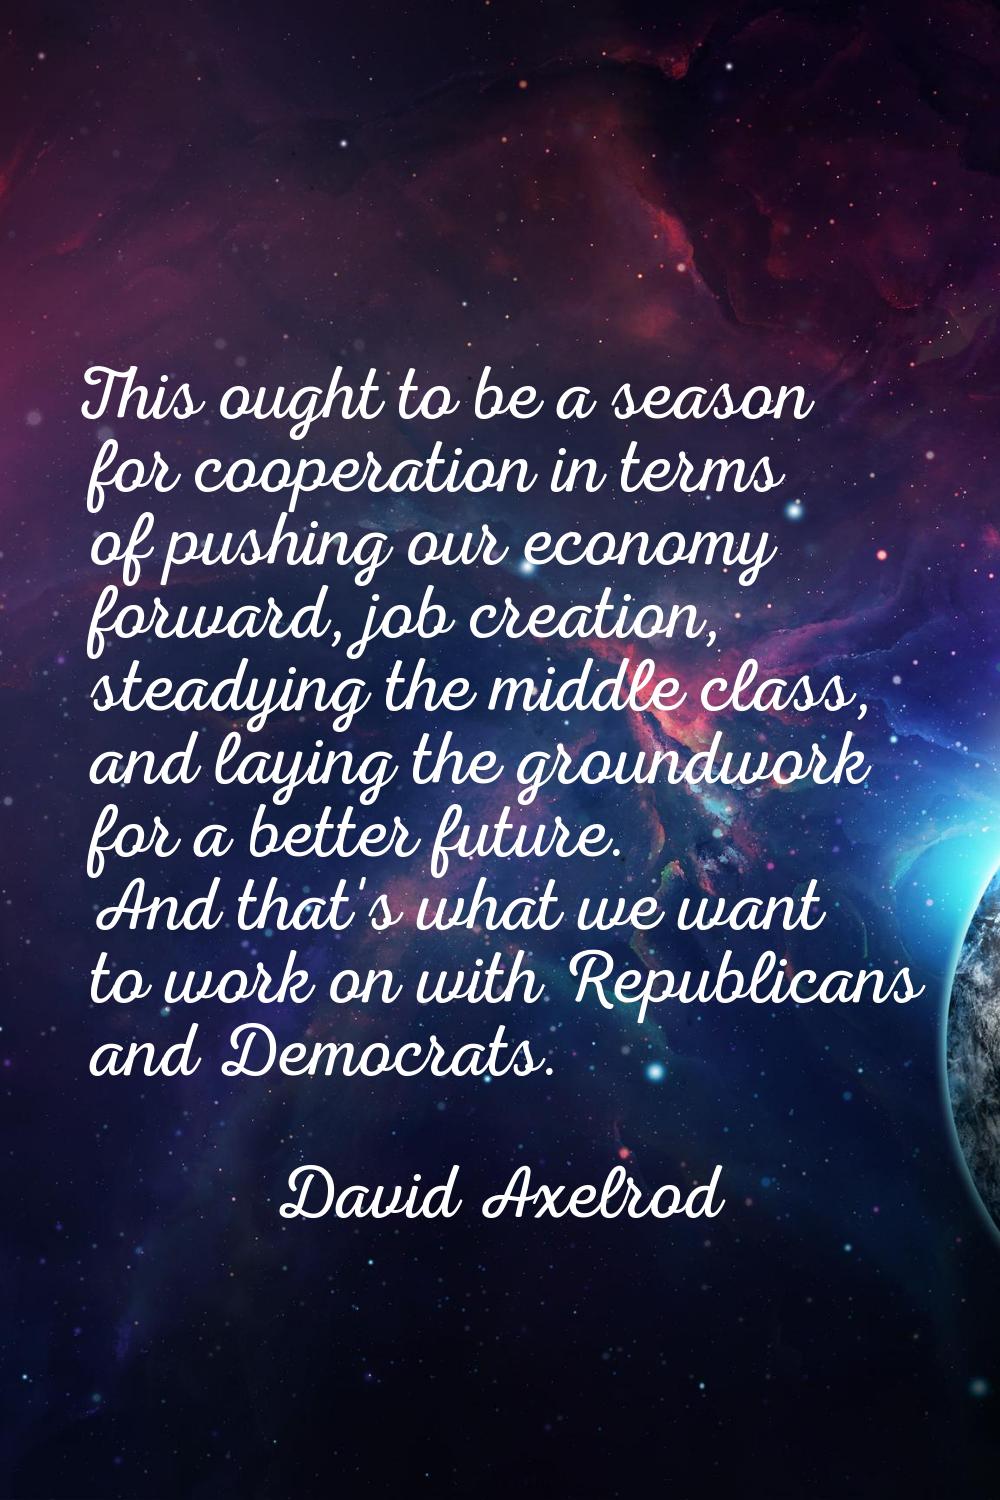 This ought to be a season for cooperation in terms of pushing our economy forward, job creation, st